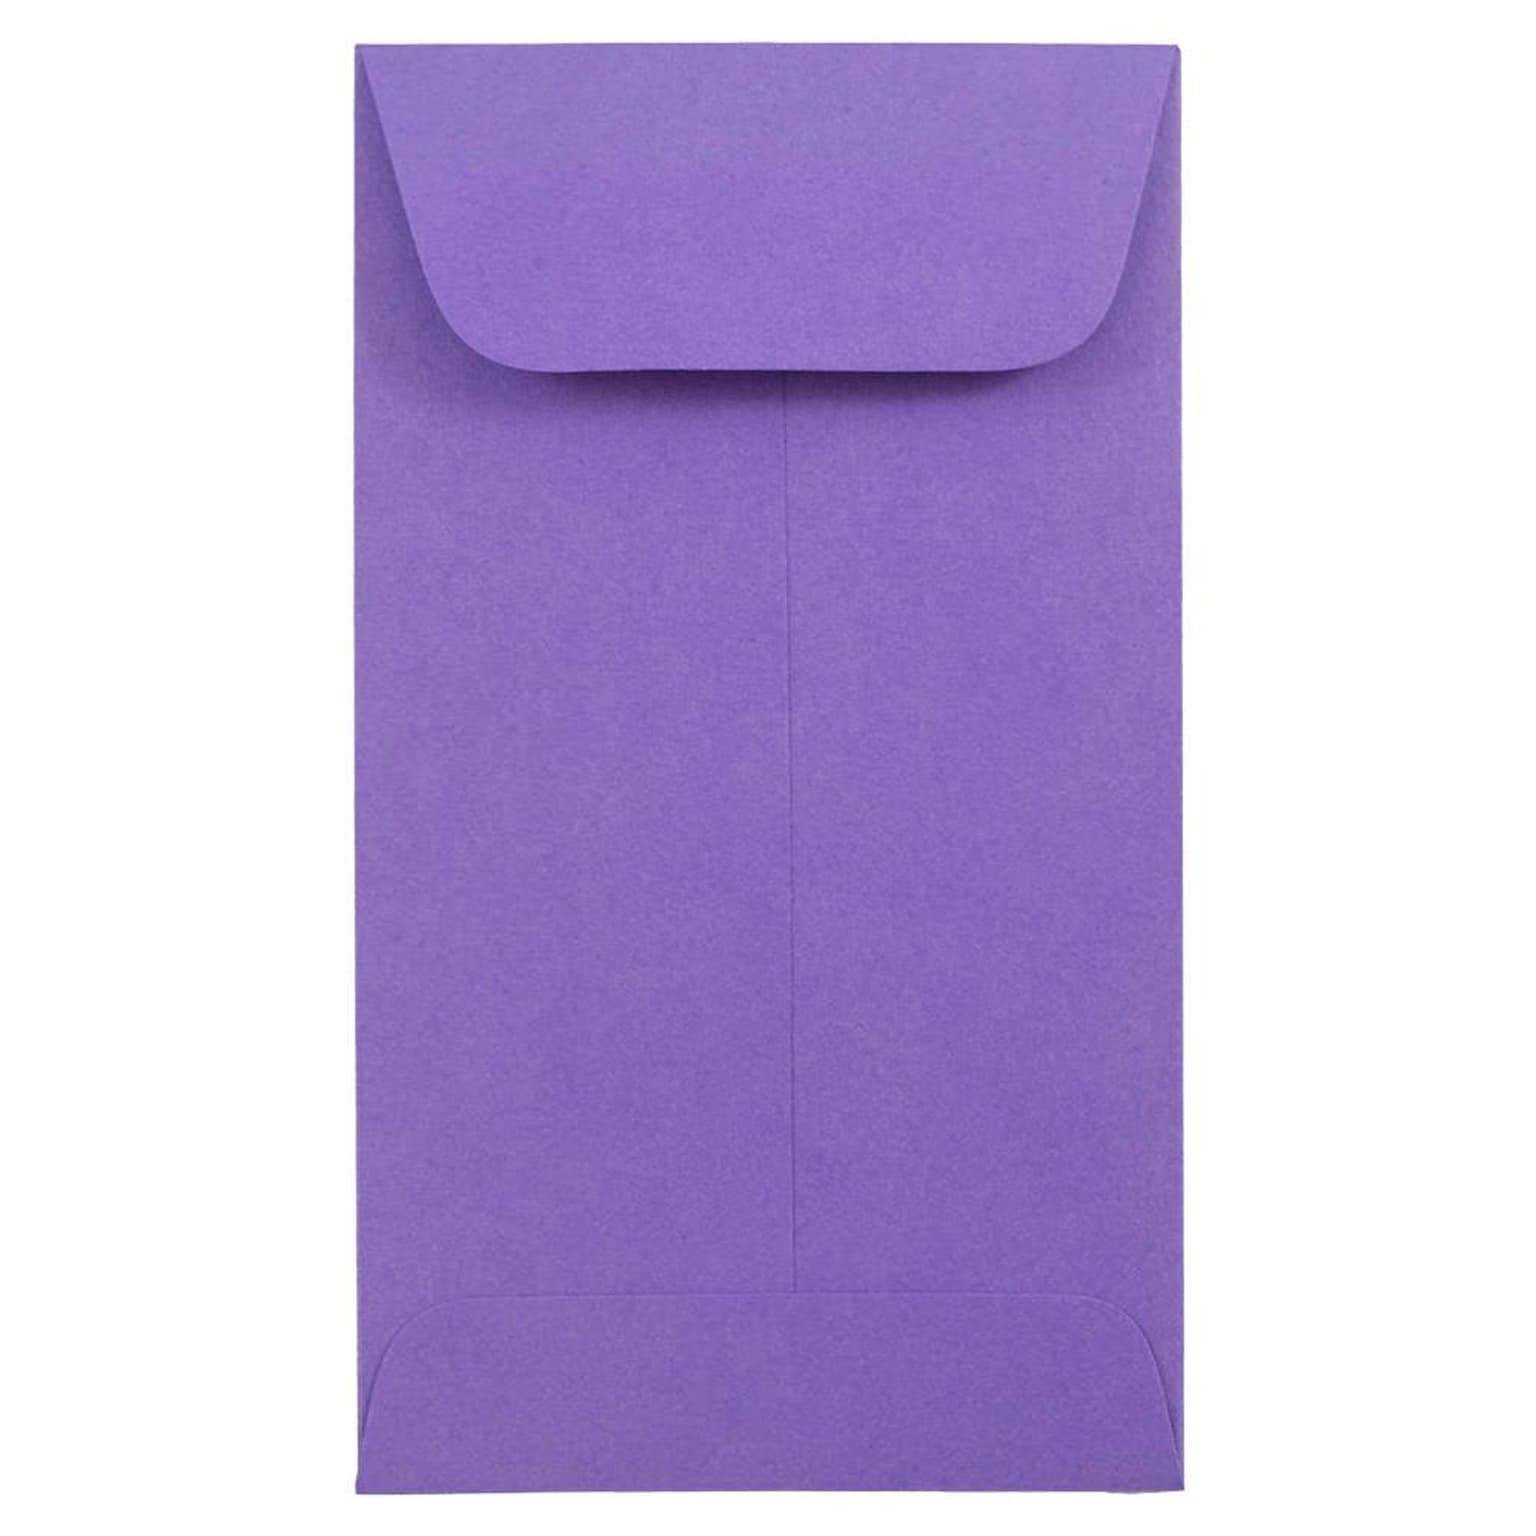 JAM Paper #6 Coin Business Colored Envelopes, 3.375 x 6, Violet Purple Recycled, 50/Pack (356730560i)